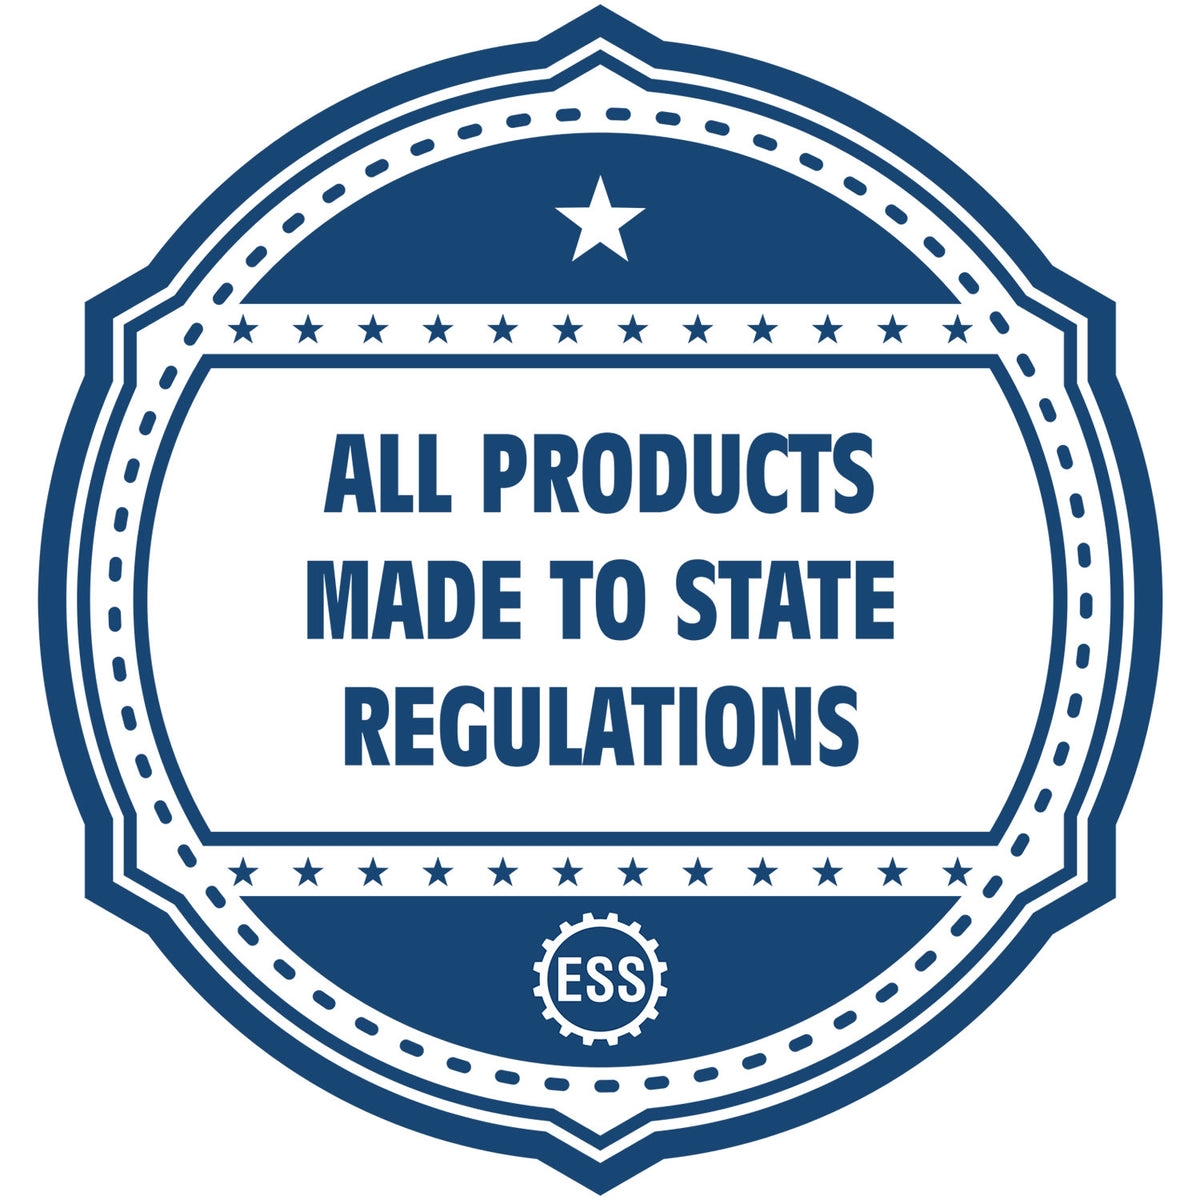 An icon or badge element for the Heavy Duty Cast Iron Minnesota Engineer Seal Embosser showing that this product is made in compliance with state regulations.